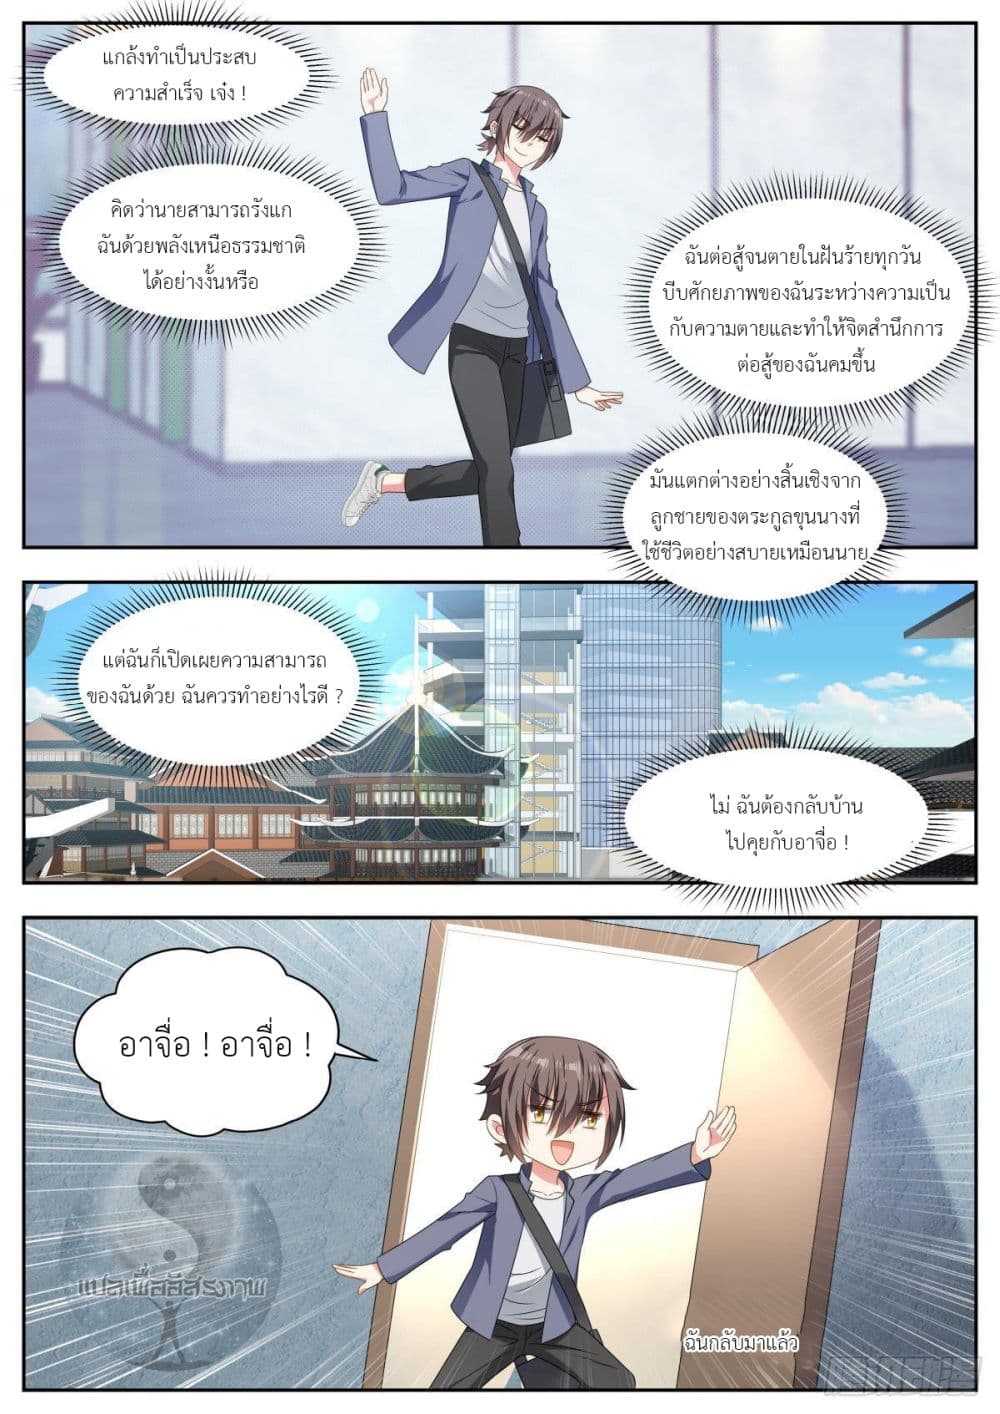 Miss, Something's Wrong With You สาวน้อยคุณคิดผิดแล้ว 20-20